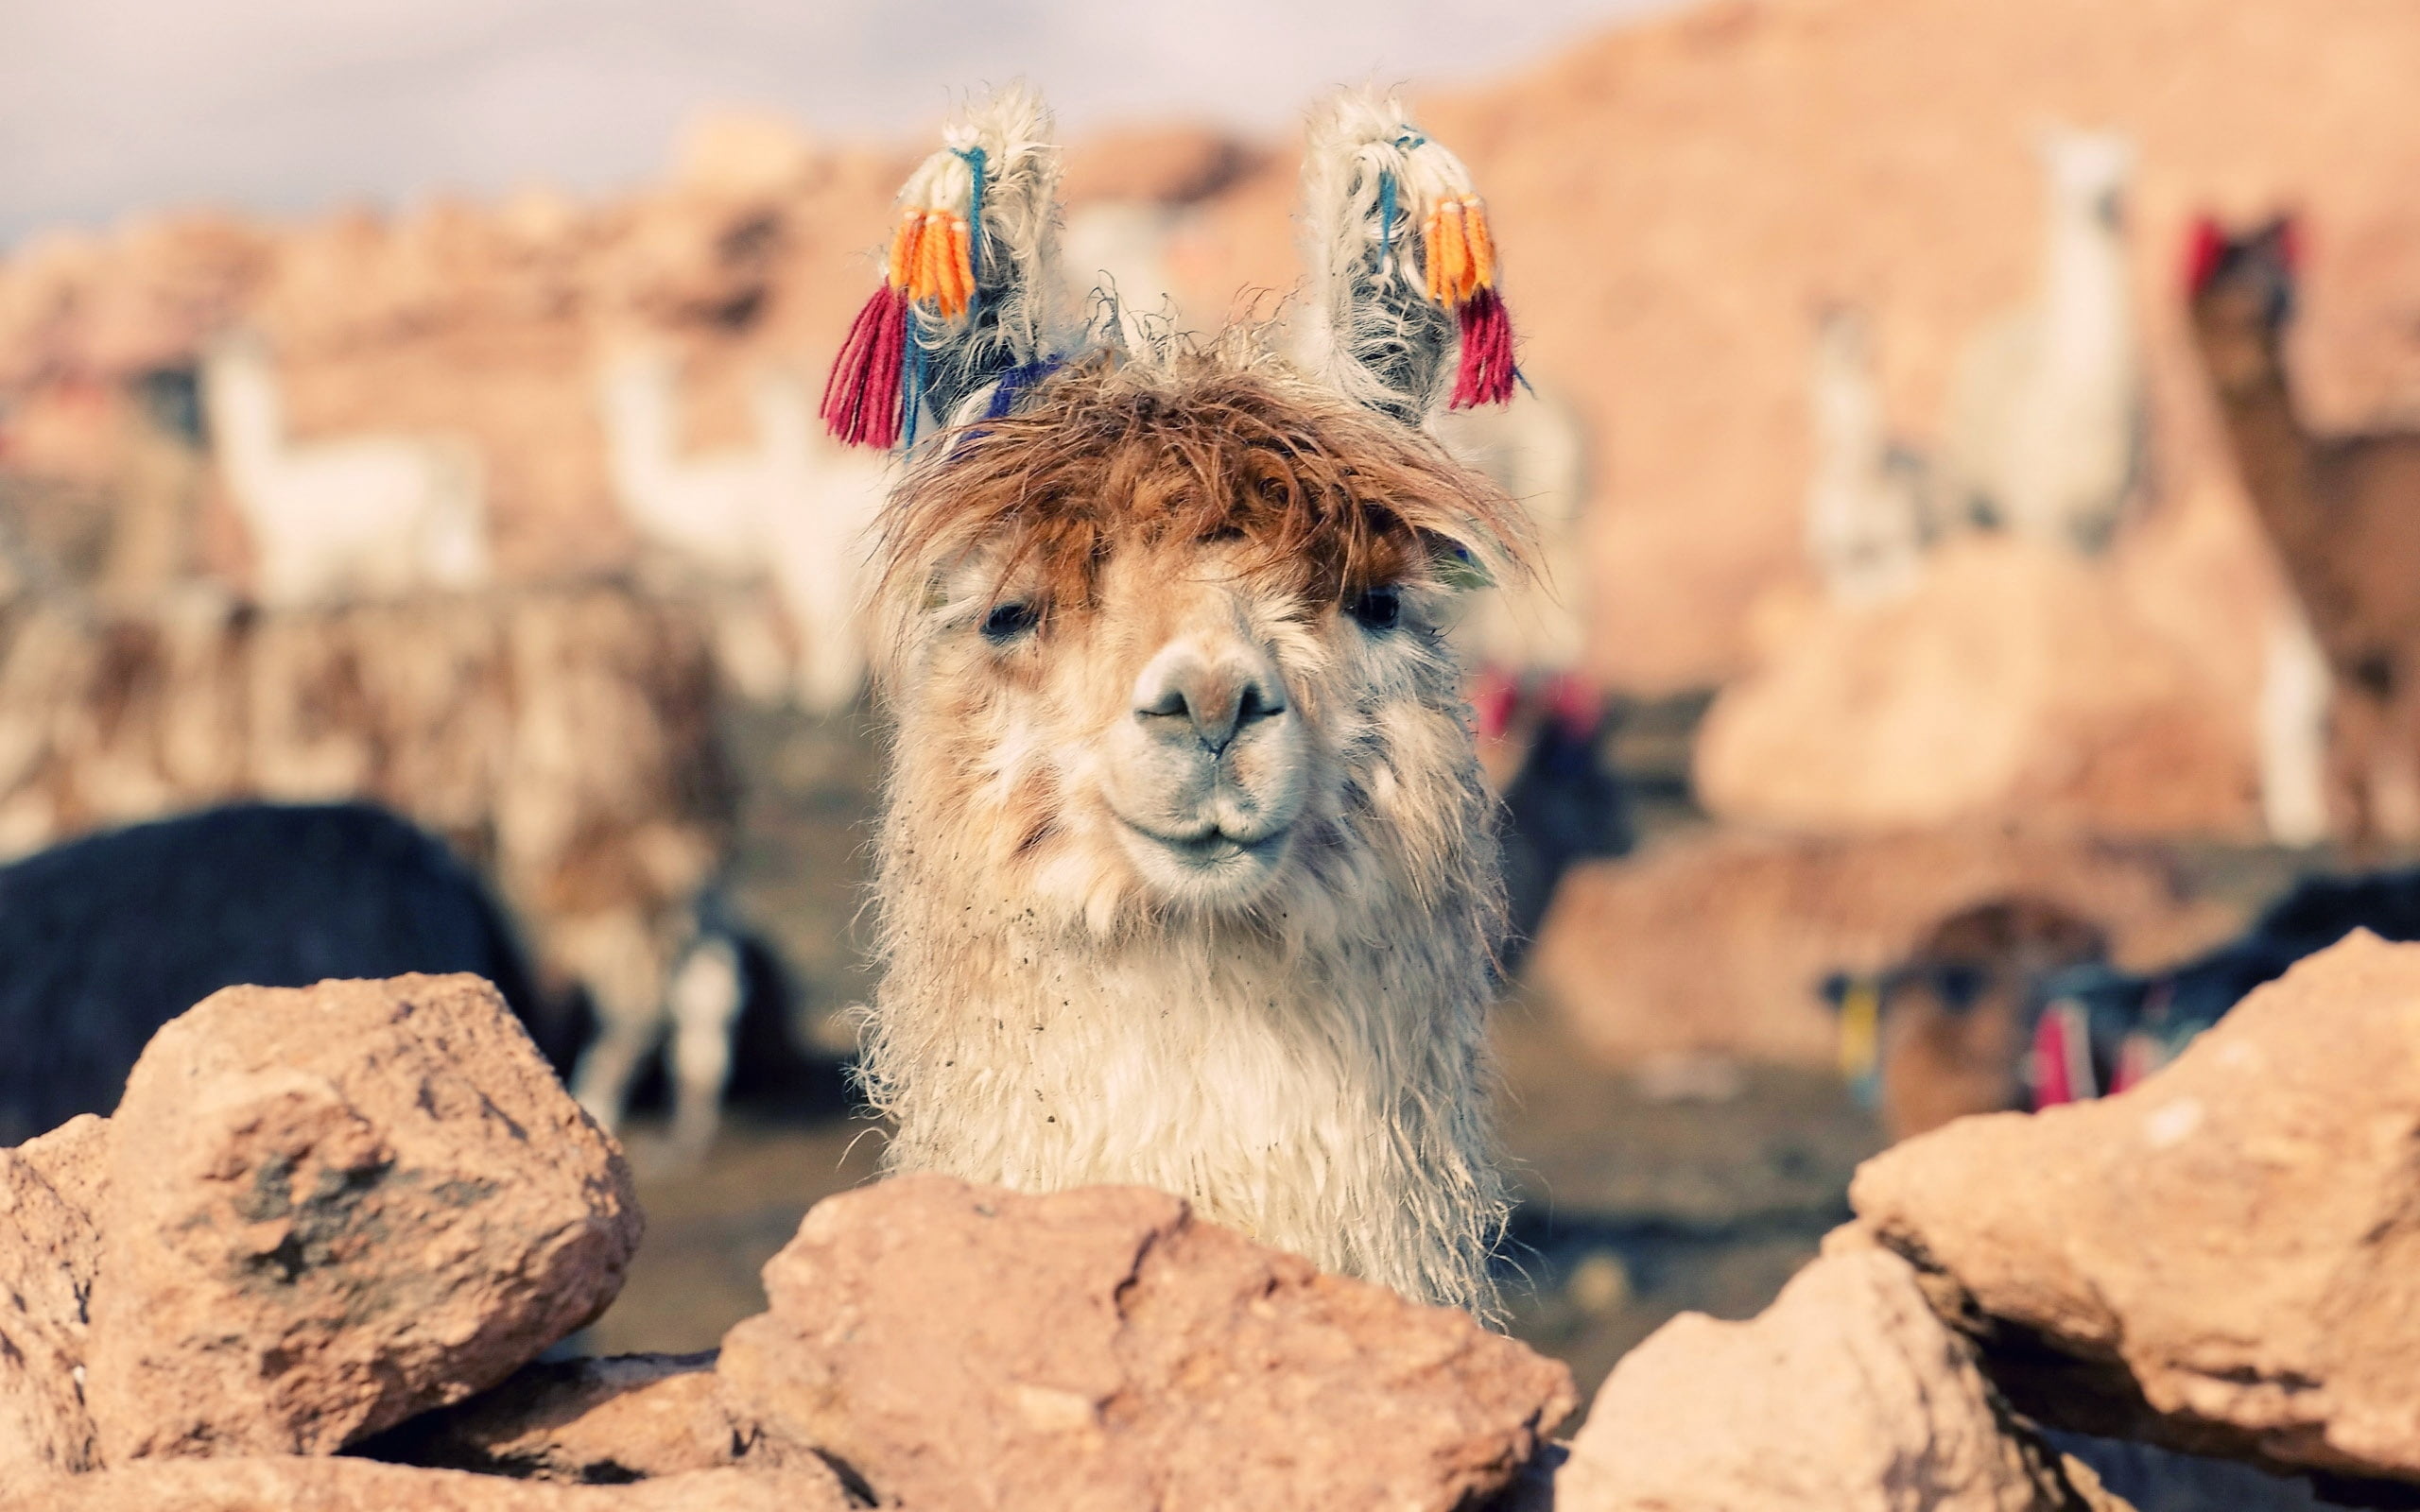 white and brown llama, face, stones, nose, animal, nature, andes